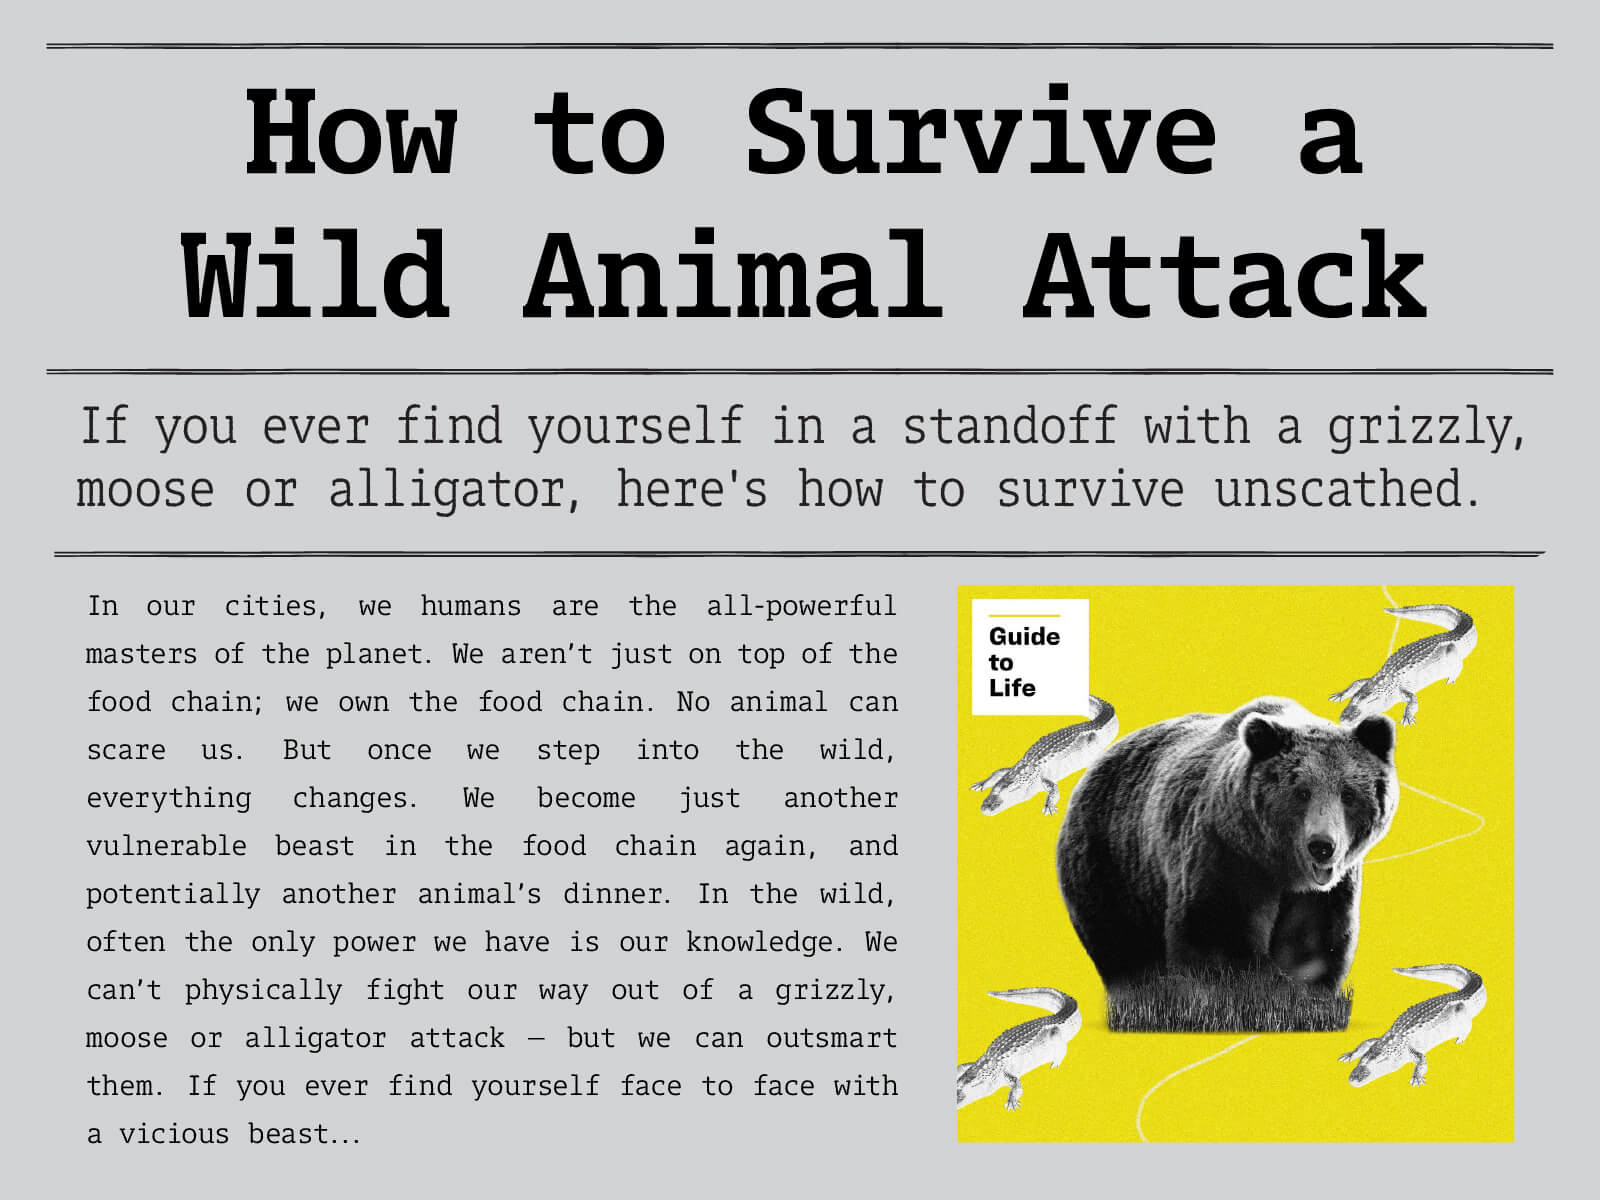 How to Survive a Wild Animal Attack. If you ever find yourself in a standoff with a grizzly, moose or alligator, here's how to survive unscathed. Click to read more.